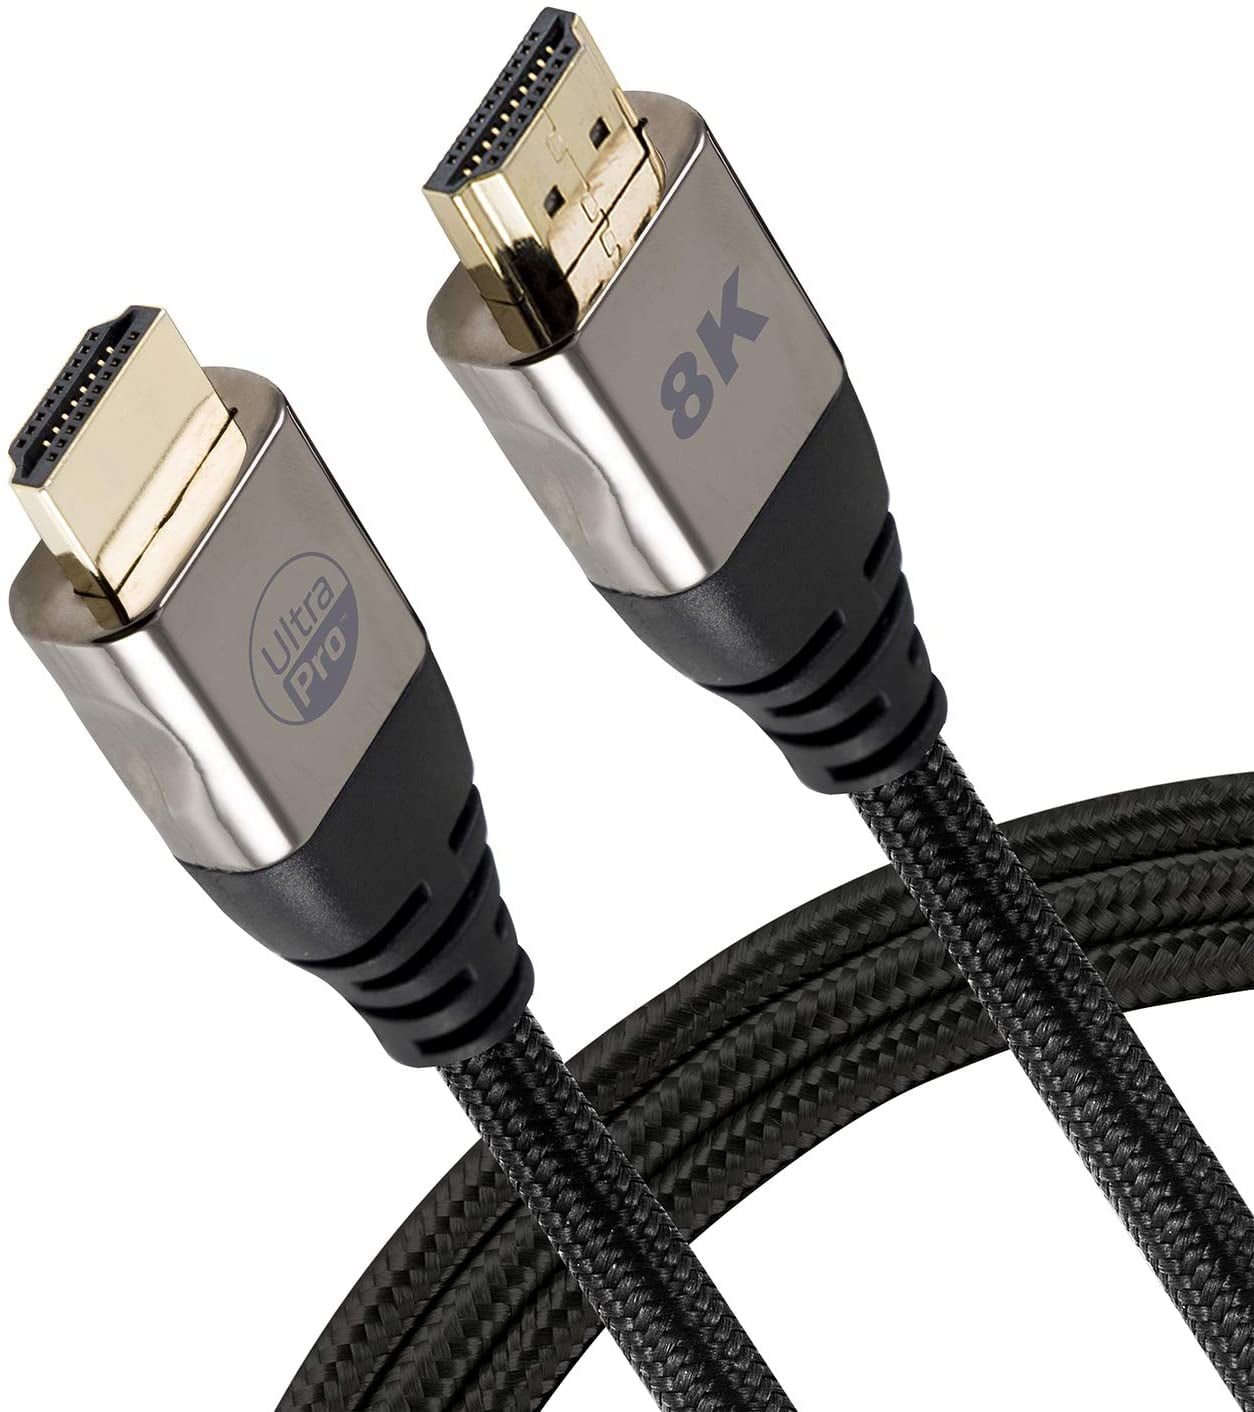 GENERAL ELECTRIC UltraPro 2.1 Premium HDMI Cable with Ethernet, 8K